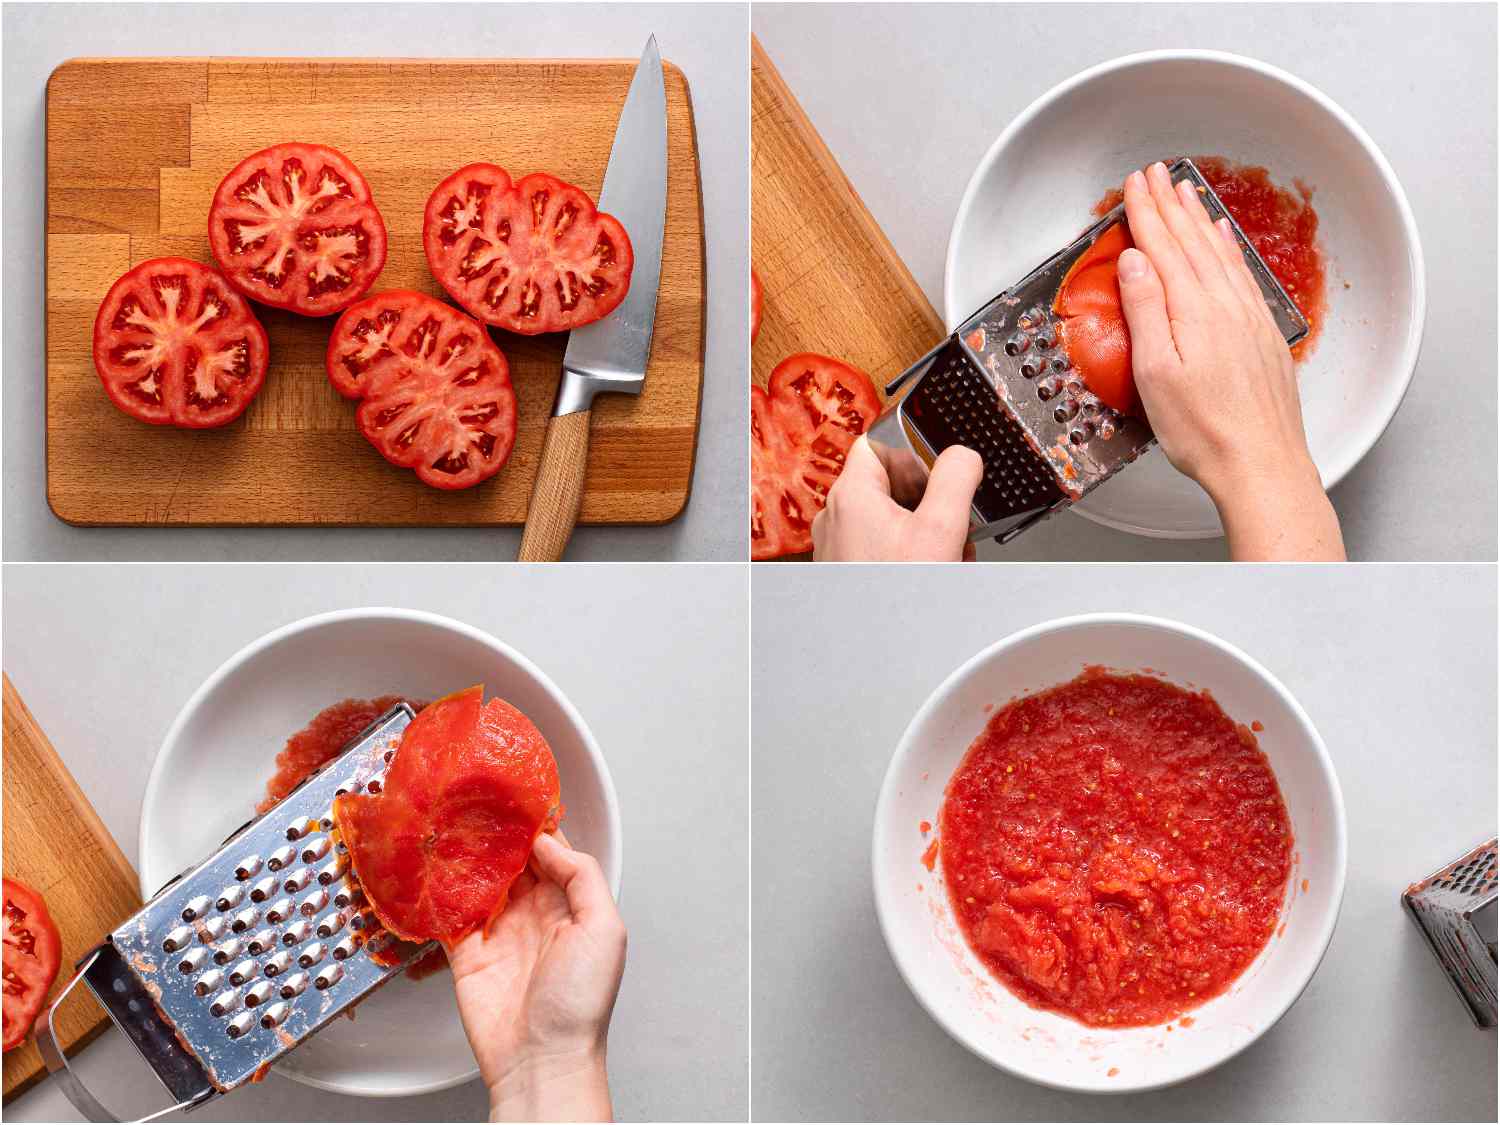 A collage demonstrating the process for grating tomatoes. From top left going clockwise: tomatoes sliced in half horizontally; half a tomato being grated on a box grater; the skin of the granted tomato on top of a box grater; a bowl of the grated tomato flesh in a white bowl.